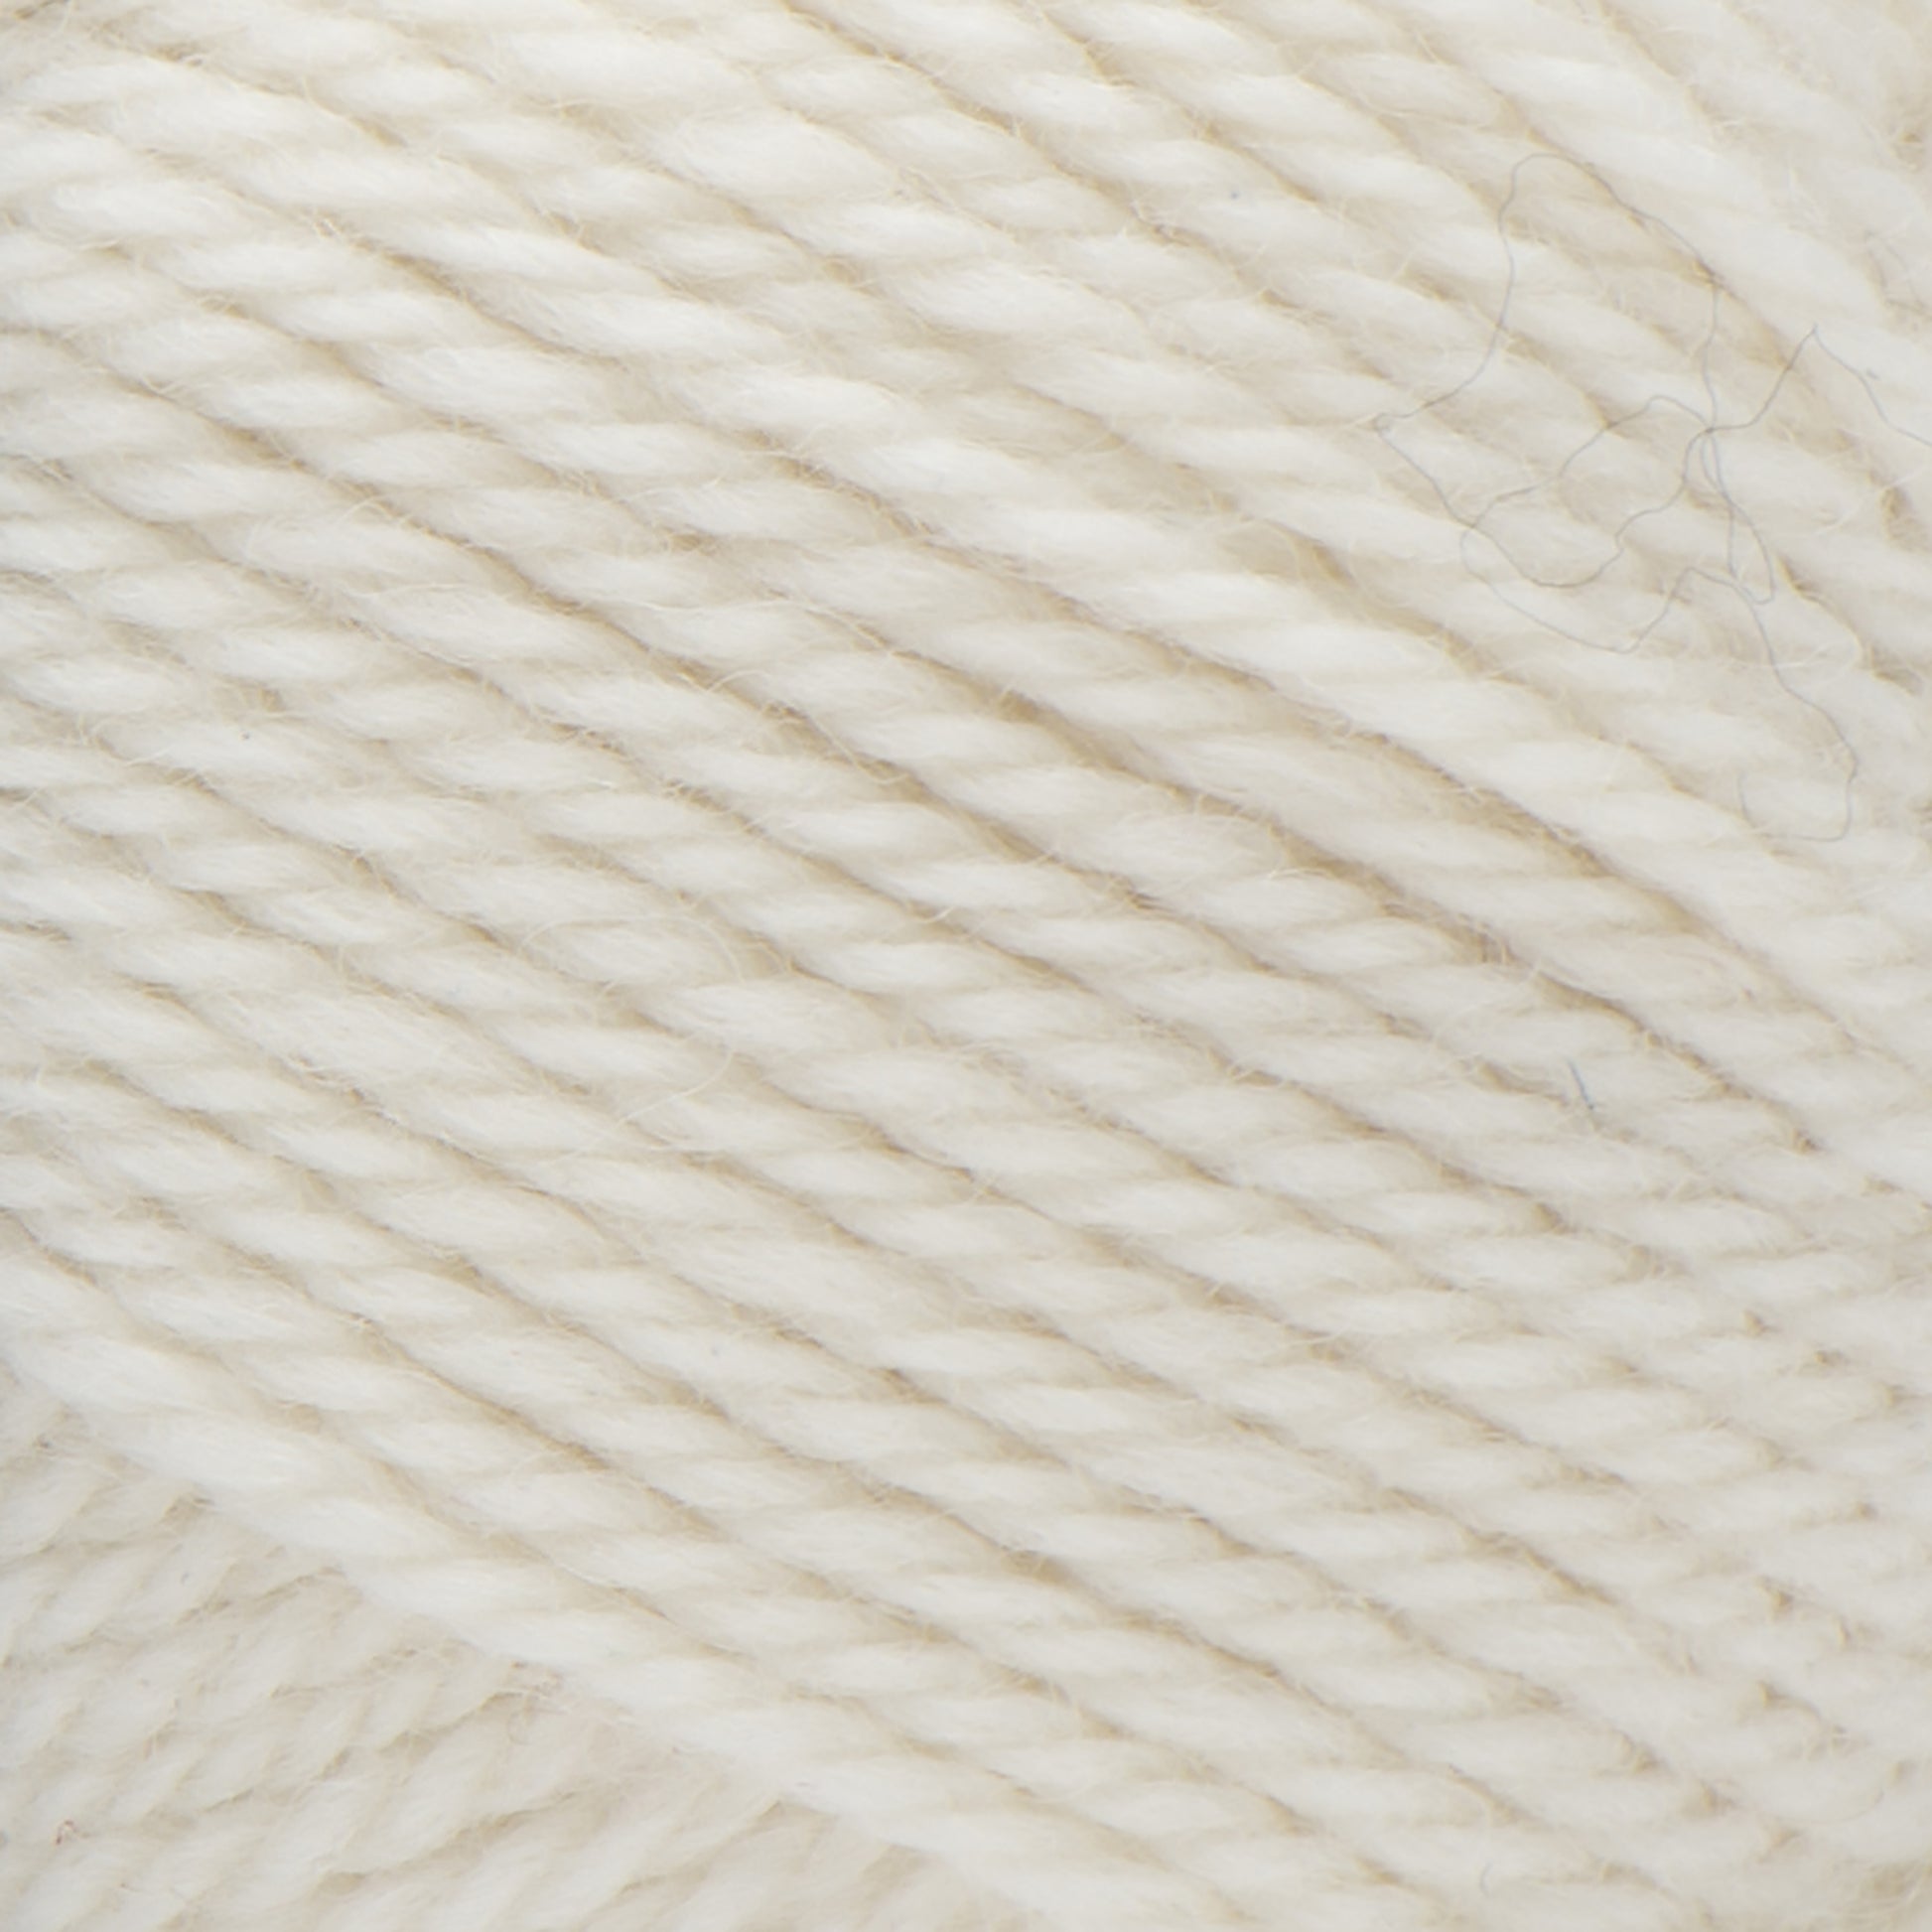 Sirdar Country Classic Worsted - All Colours - Wool Warehouse - Buy Yarn,  Wool, Needles & Other Knitting Supplies Online!